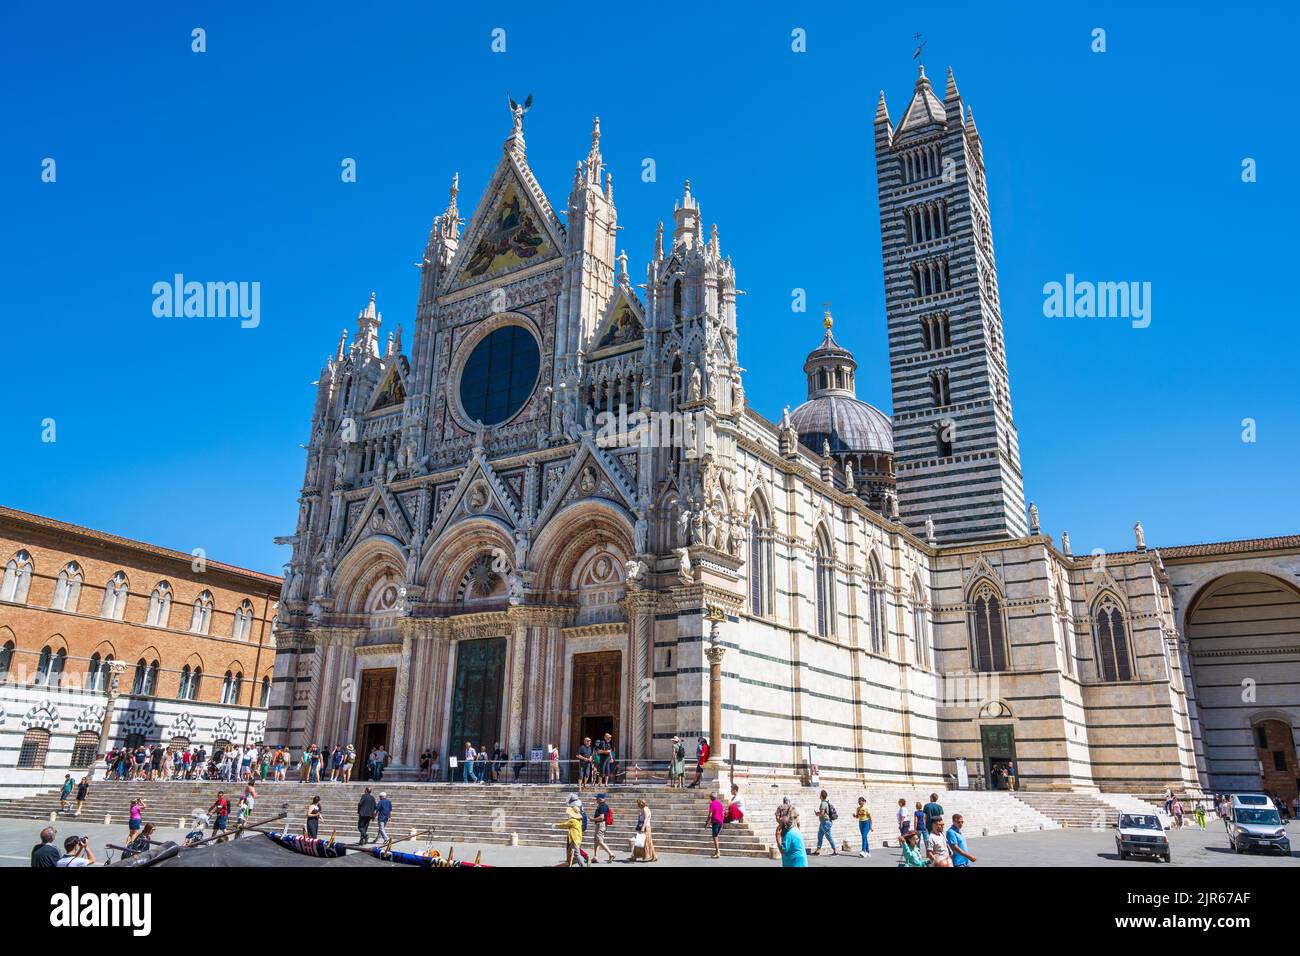 Siena Duomo (cathedral) and Campanile (bell tower) in Piazza del Duomo in Siena, Tuscany, Italy Stock Photo